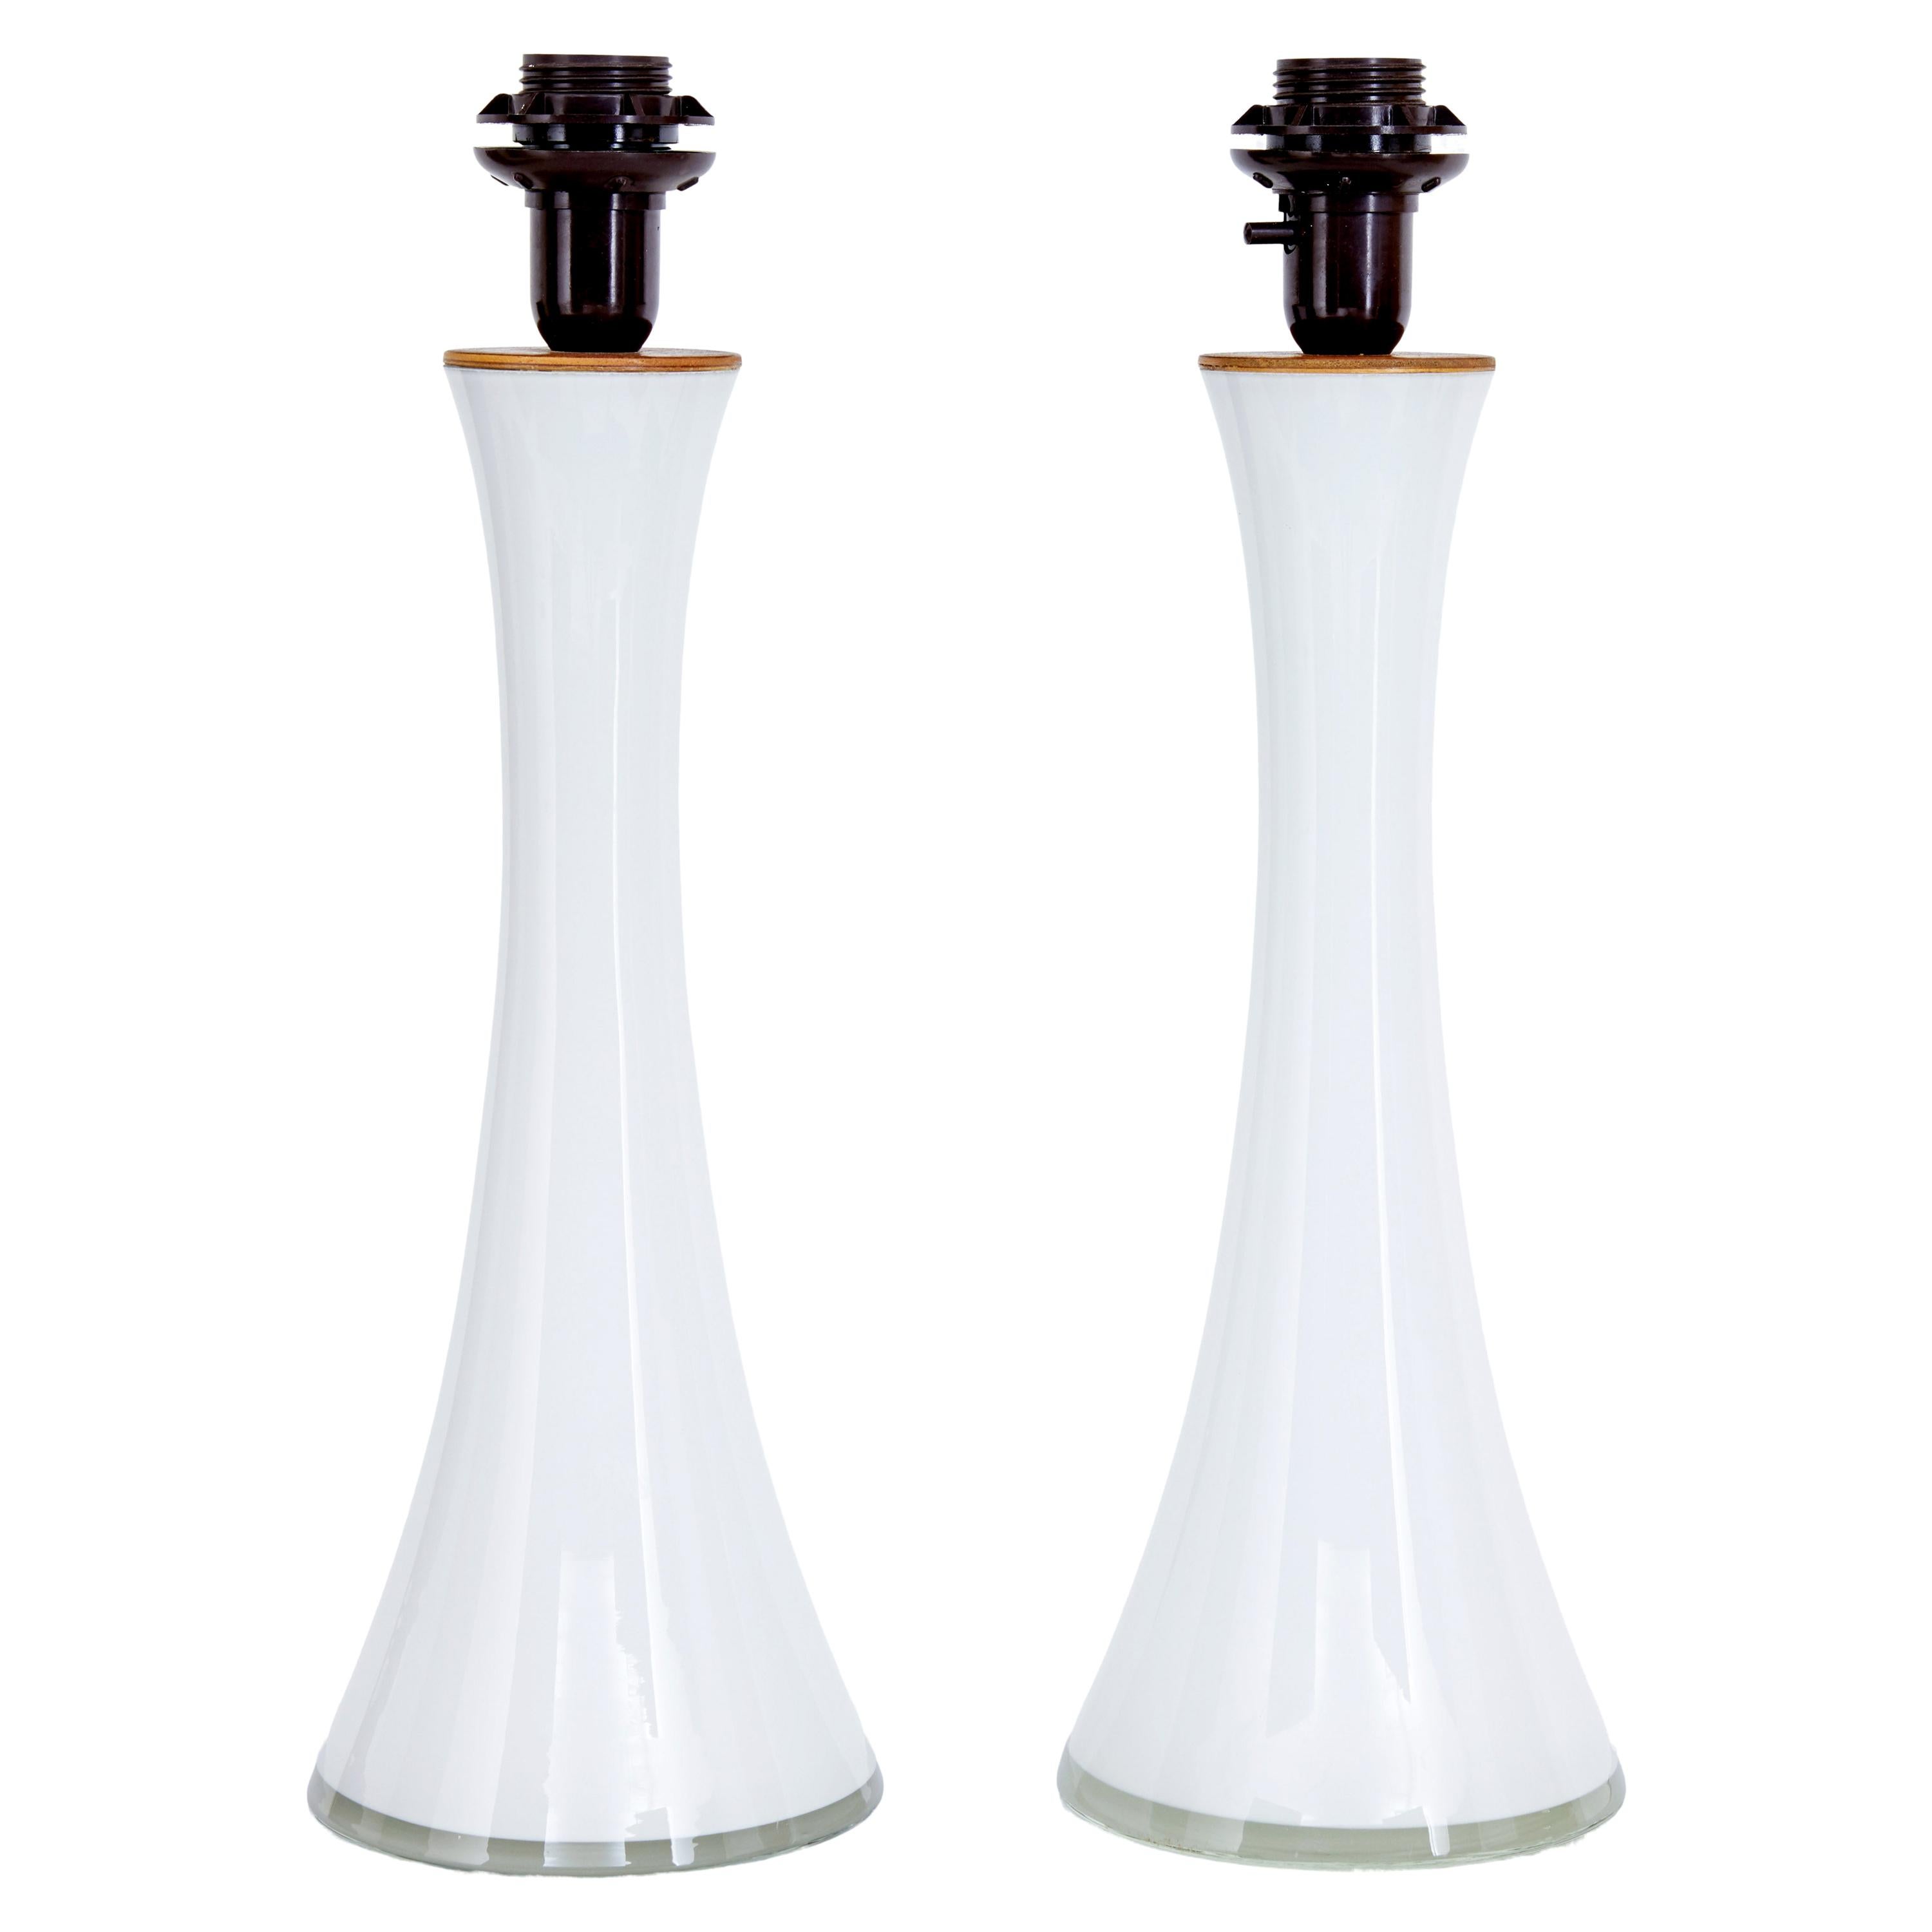 Pair of 1960s White Glass Table Lamps by Bergboms